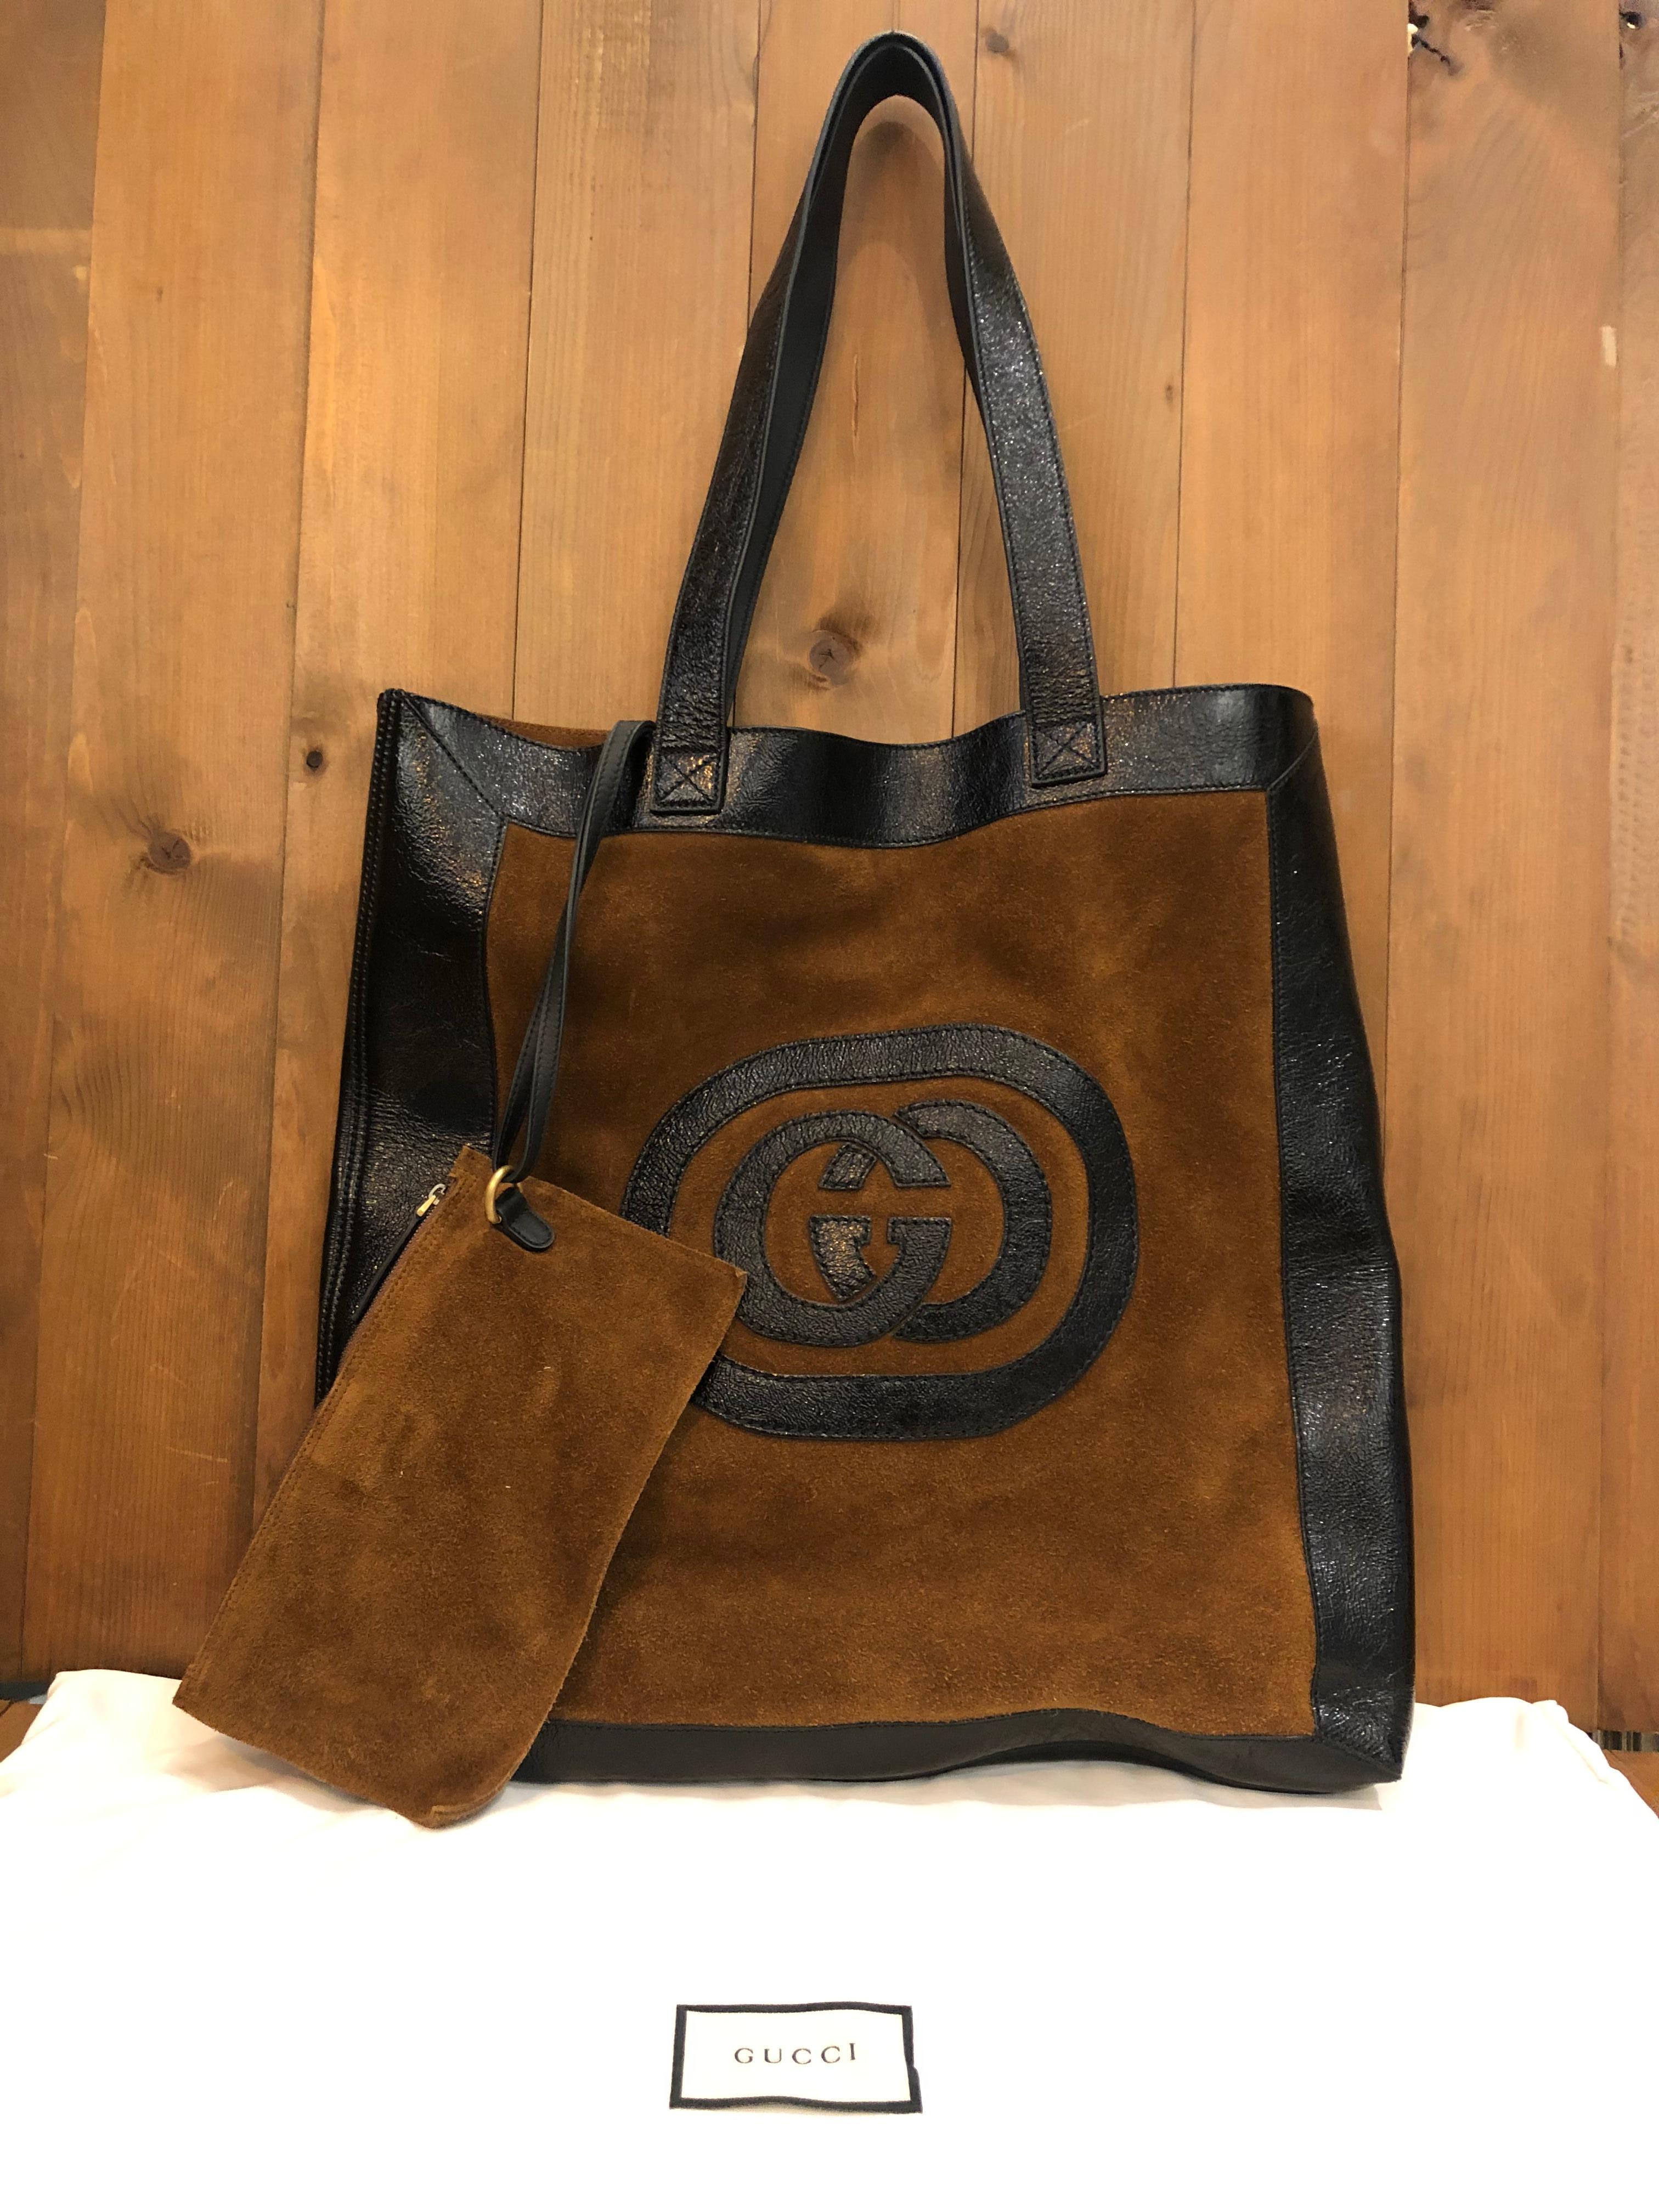 2010s GUCCI Brown Suede Oversized Tote Bag 5